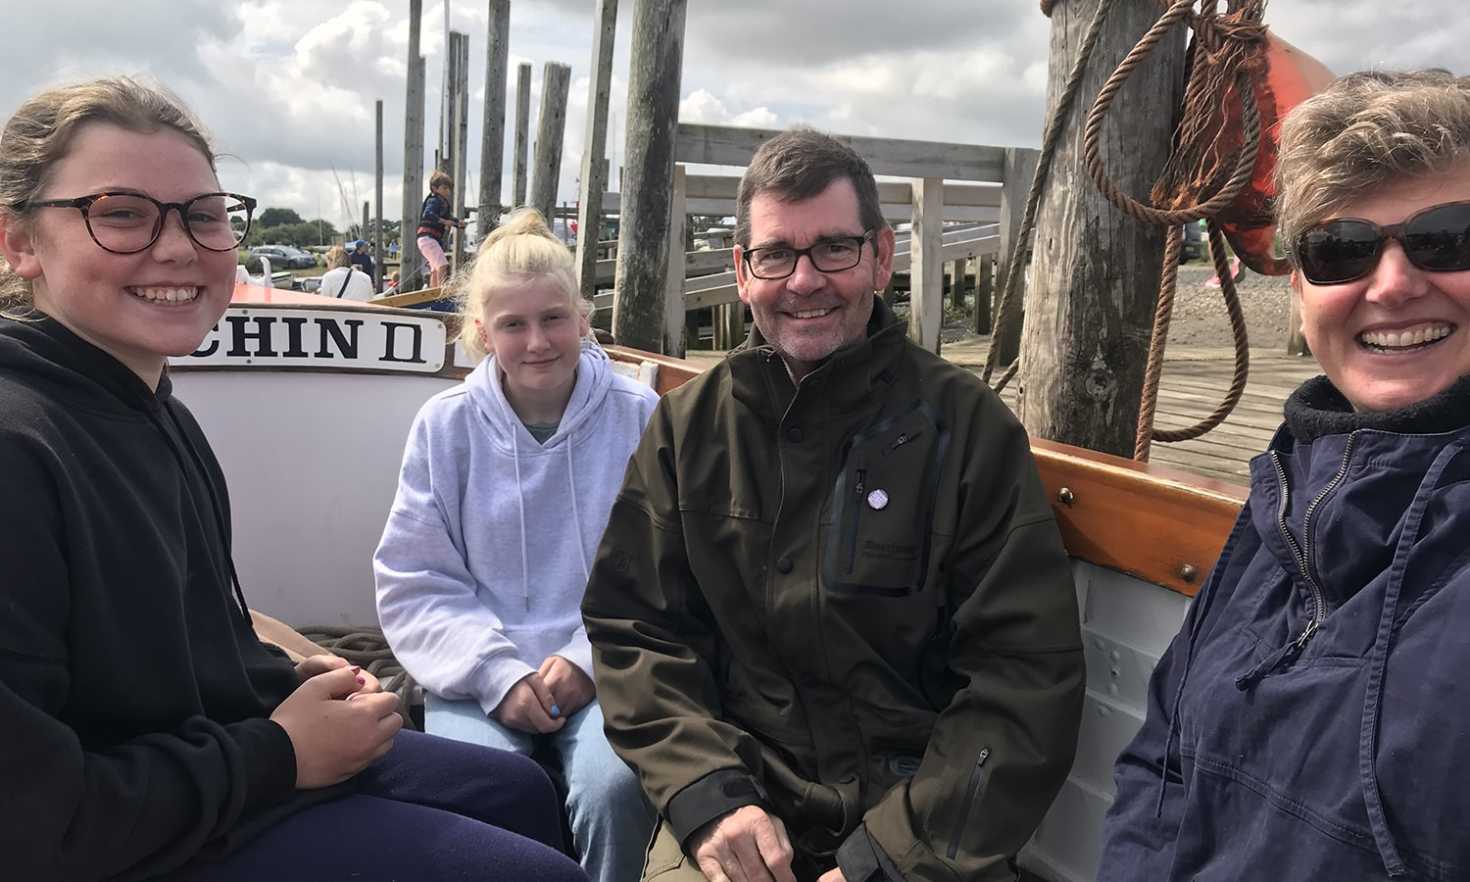 Hannah, Neil and their two daughters on holiday in Norfolk thanks to Dementia Adventure